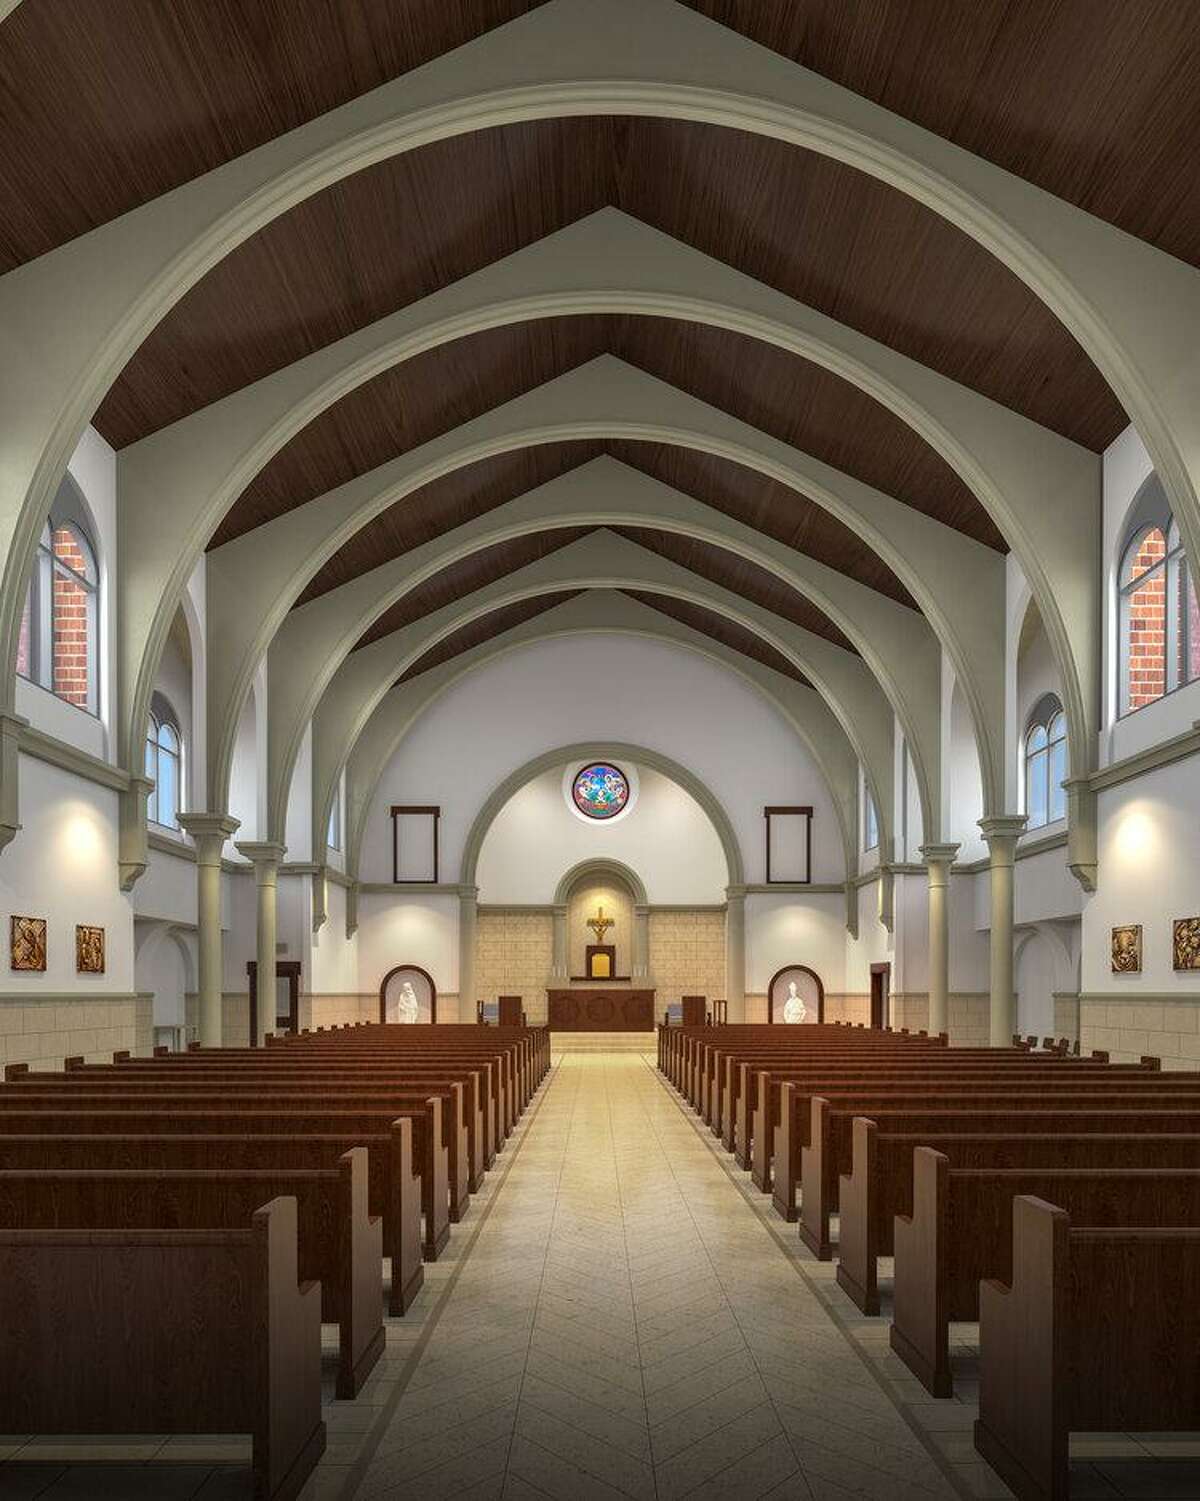 St. Anthony of Padua Catholic Church of The Woodlands plans to have its permitting for a new chapel finished by the end of next month. The new chapel, Our Lady of the Angels, is expected to break ground before the end of the year, and the church hopes to be celebrating its opening by Christmas of 2021.